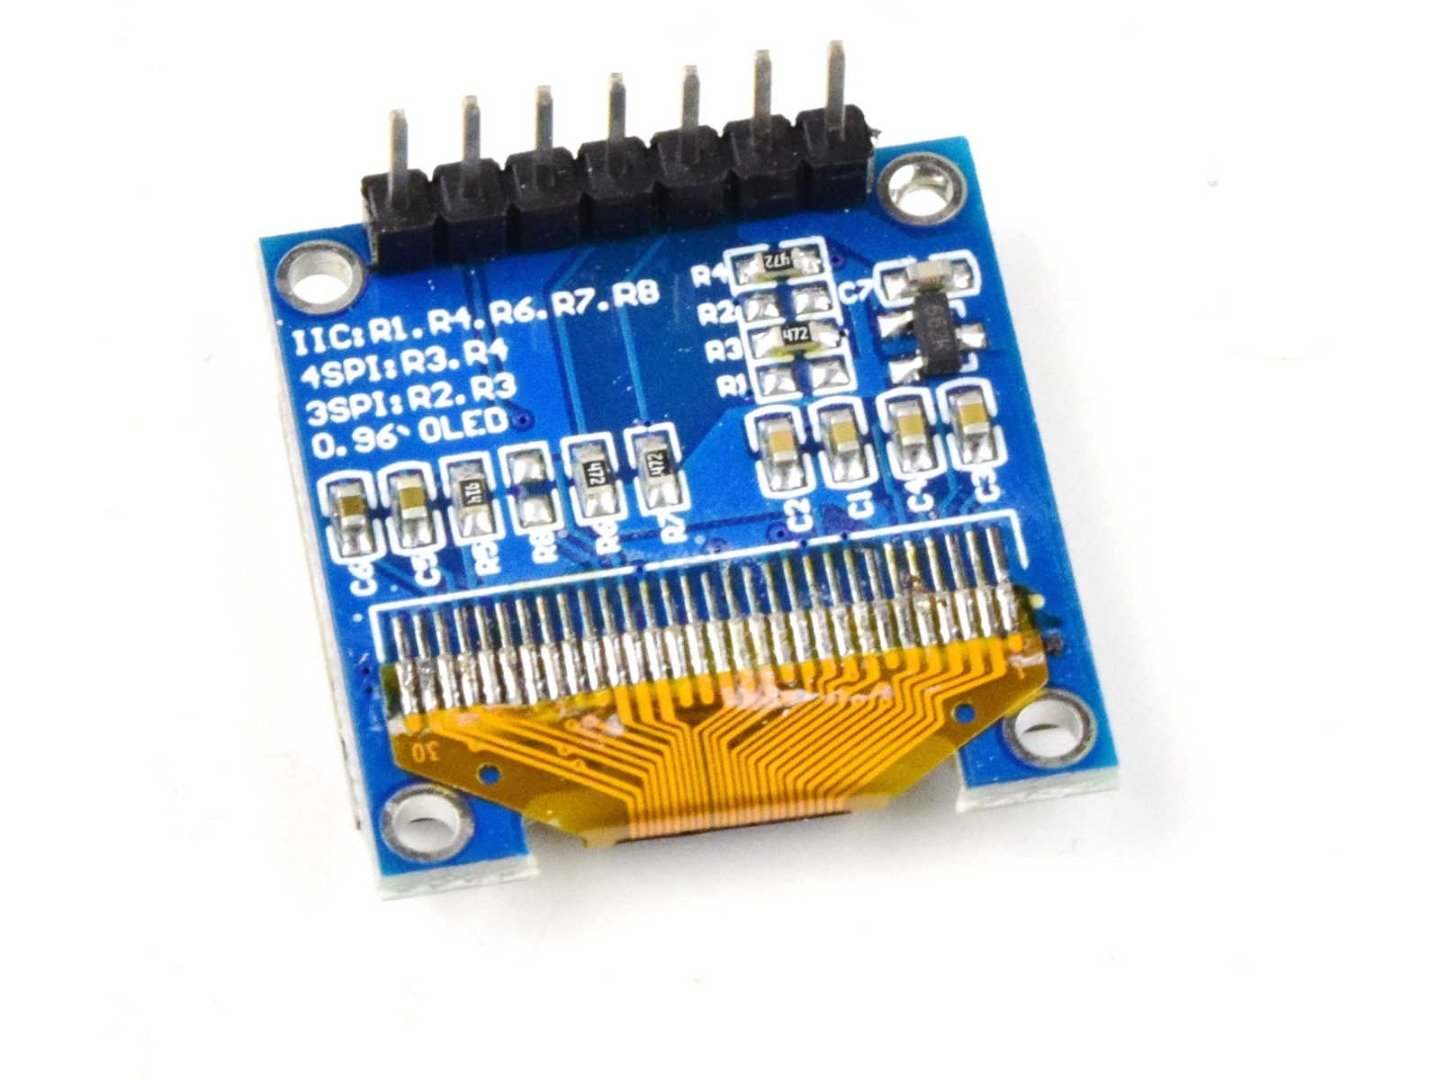 OLED Display 0.96 inch 128×64 with SPI interface – 3-5V (100% compatible with Arduino) 10